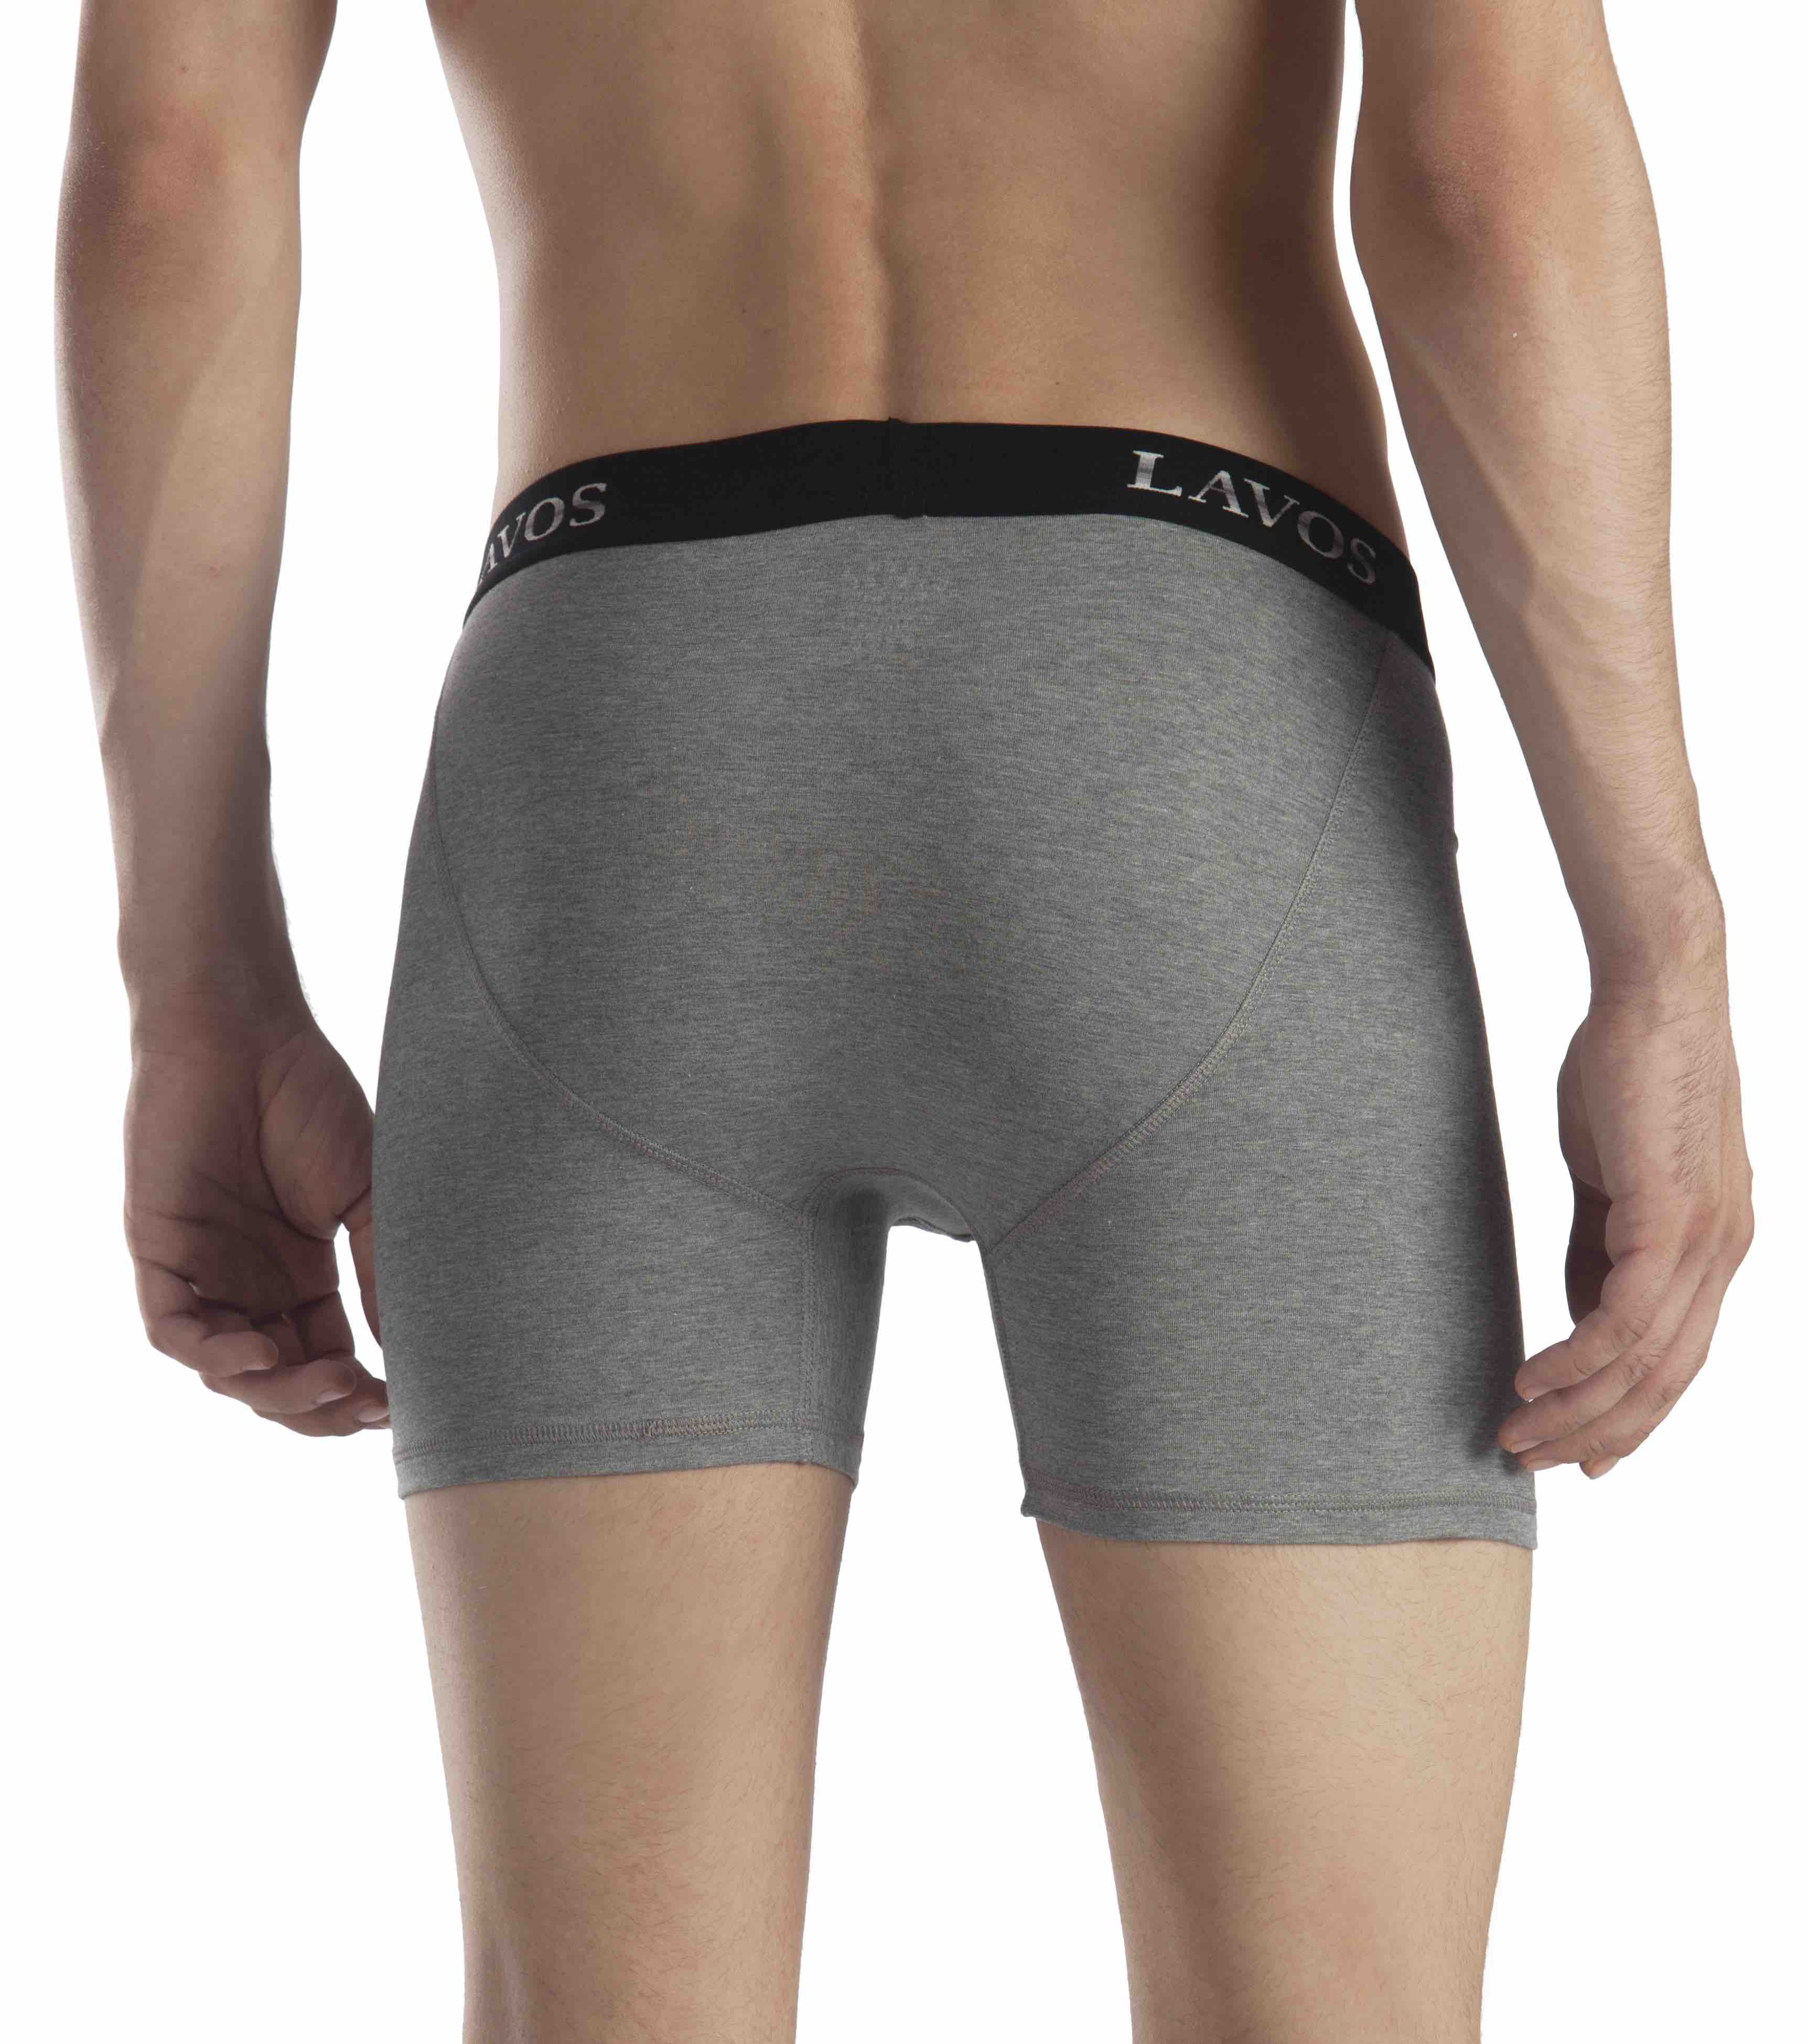 Men's Breathable cotton Micro-Mesh Boxer Briefs, Black and Gray 3 Pack